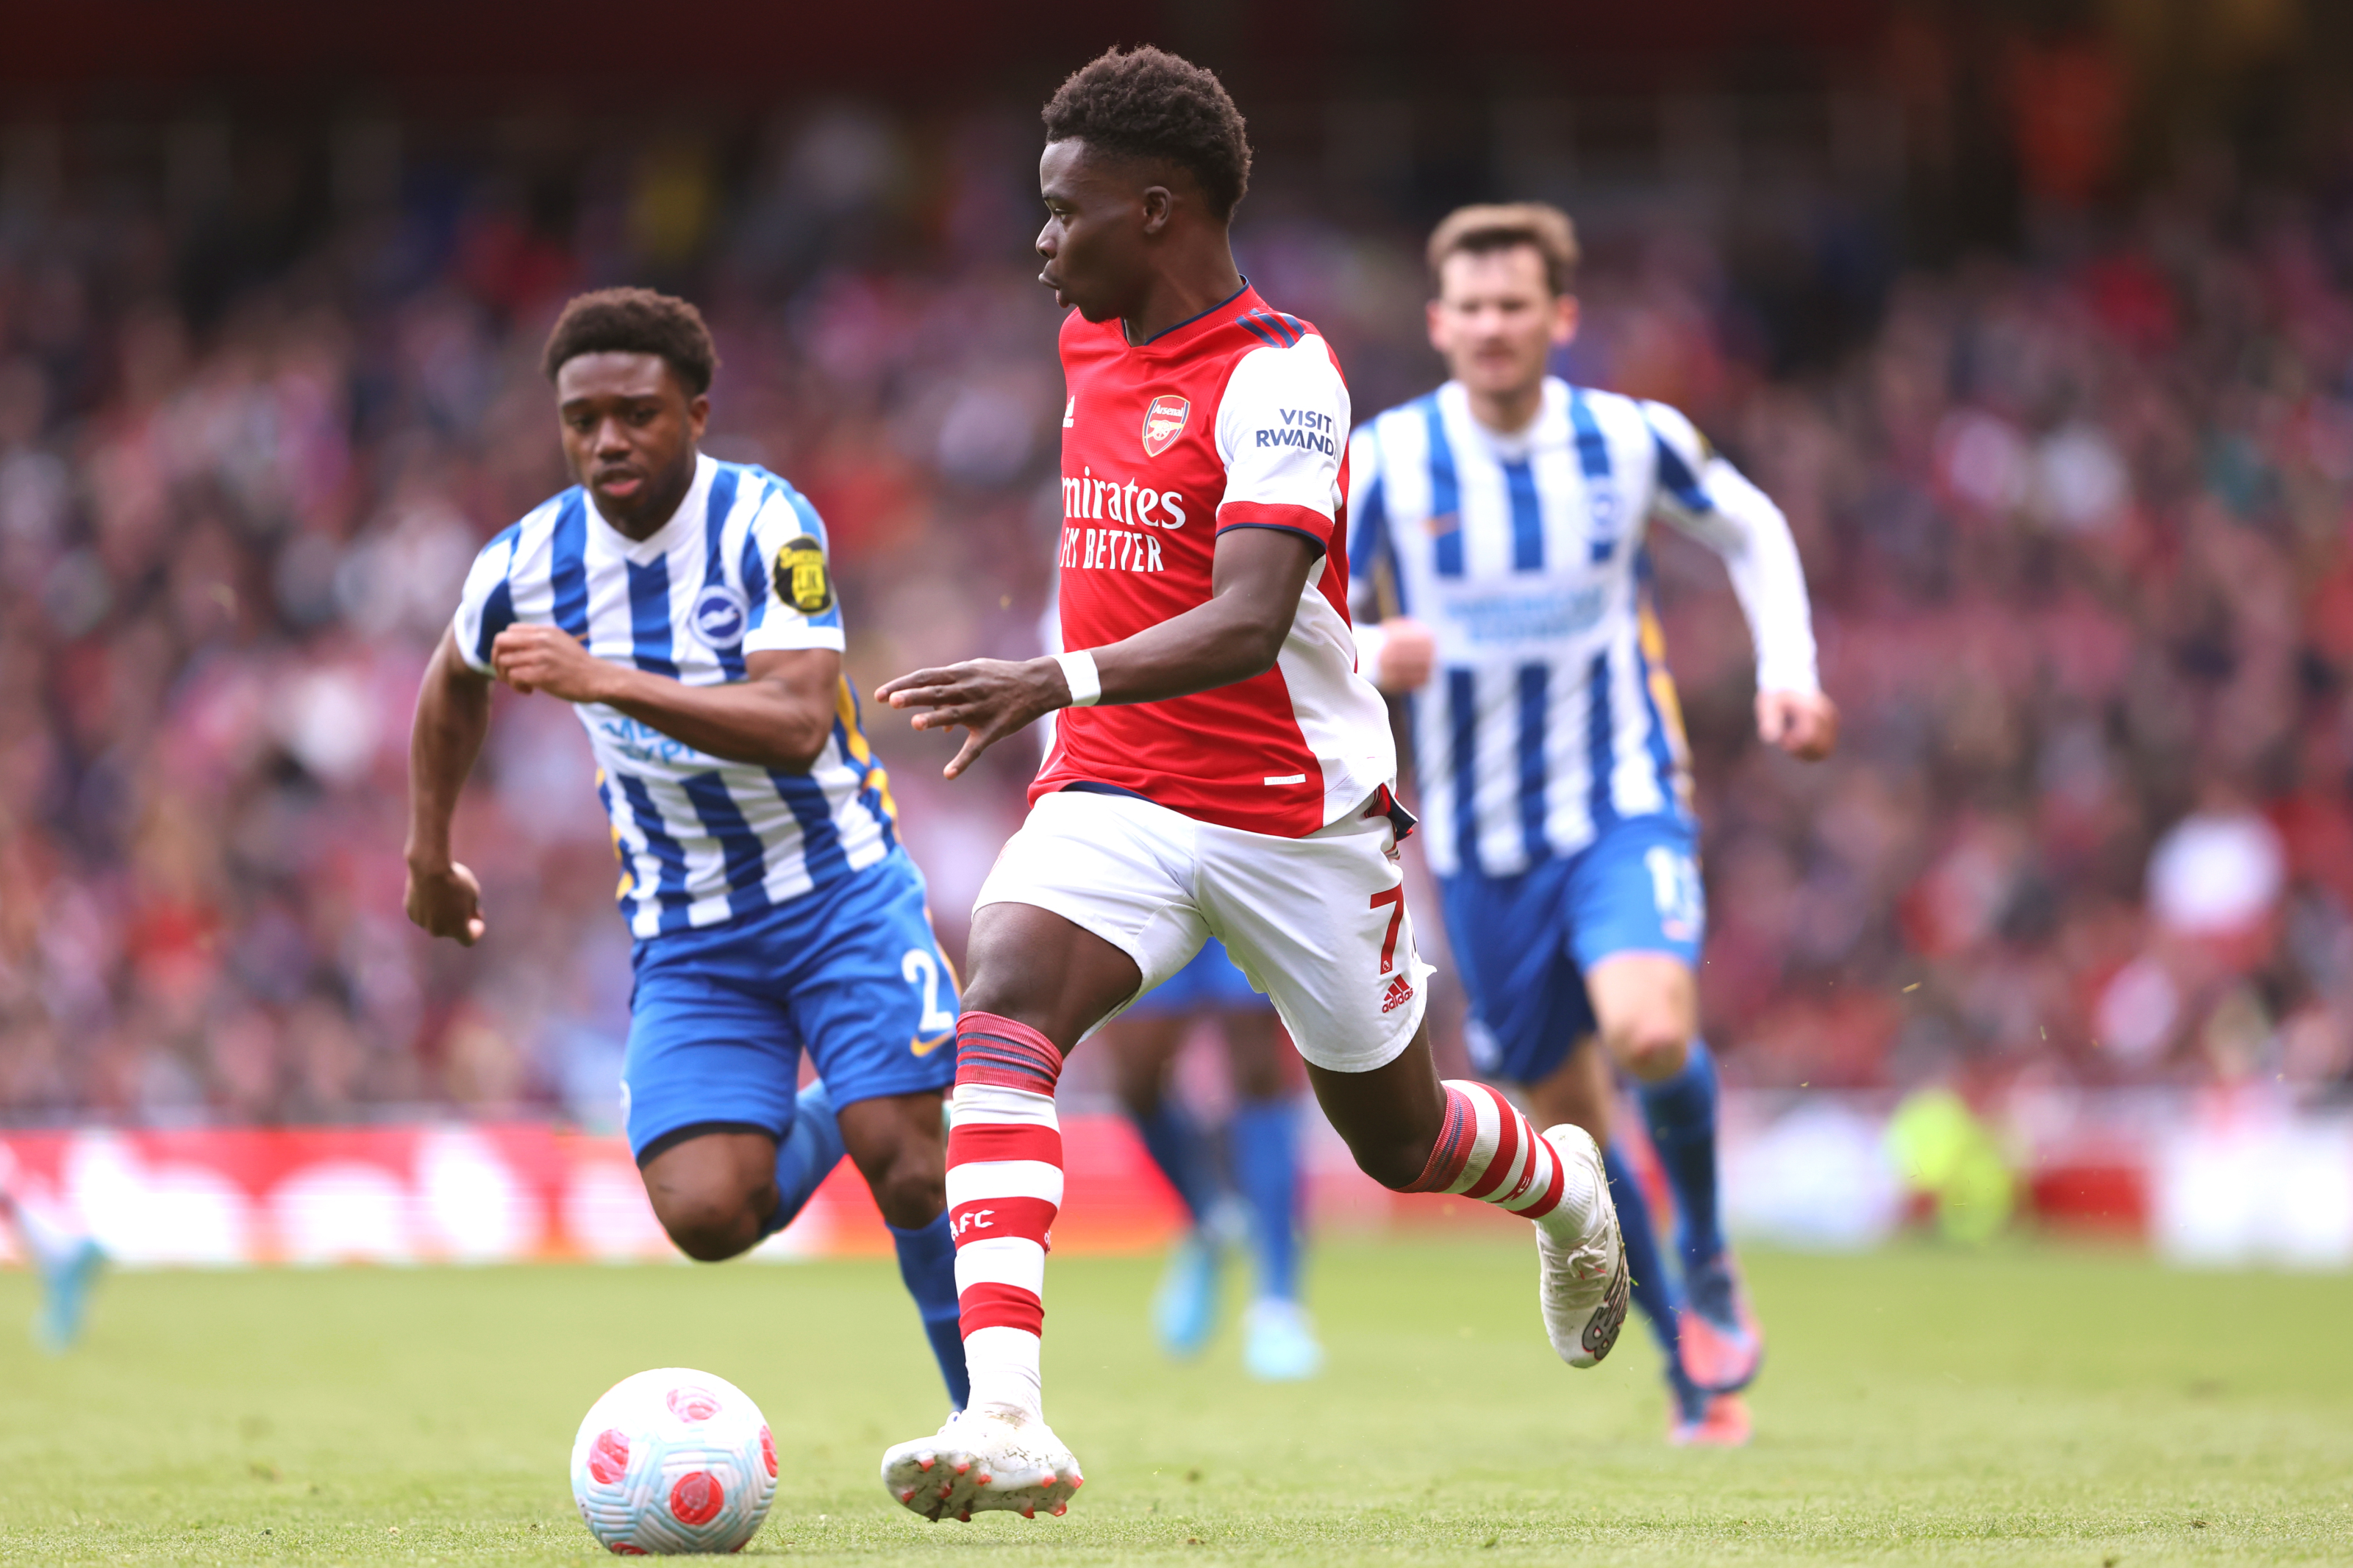 Brighton vs Arsenal Preview How to Watch, Team News and Prediction